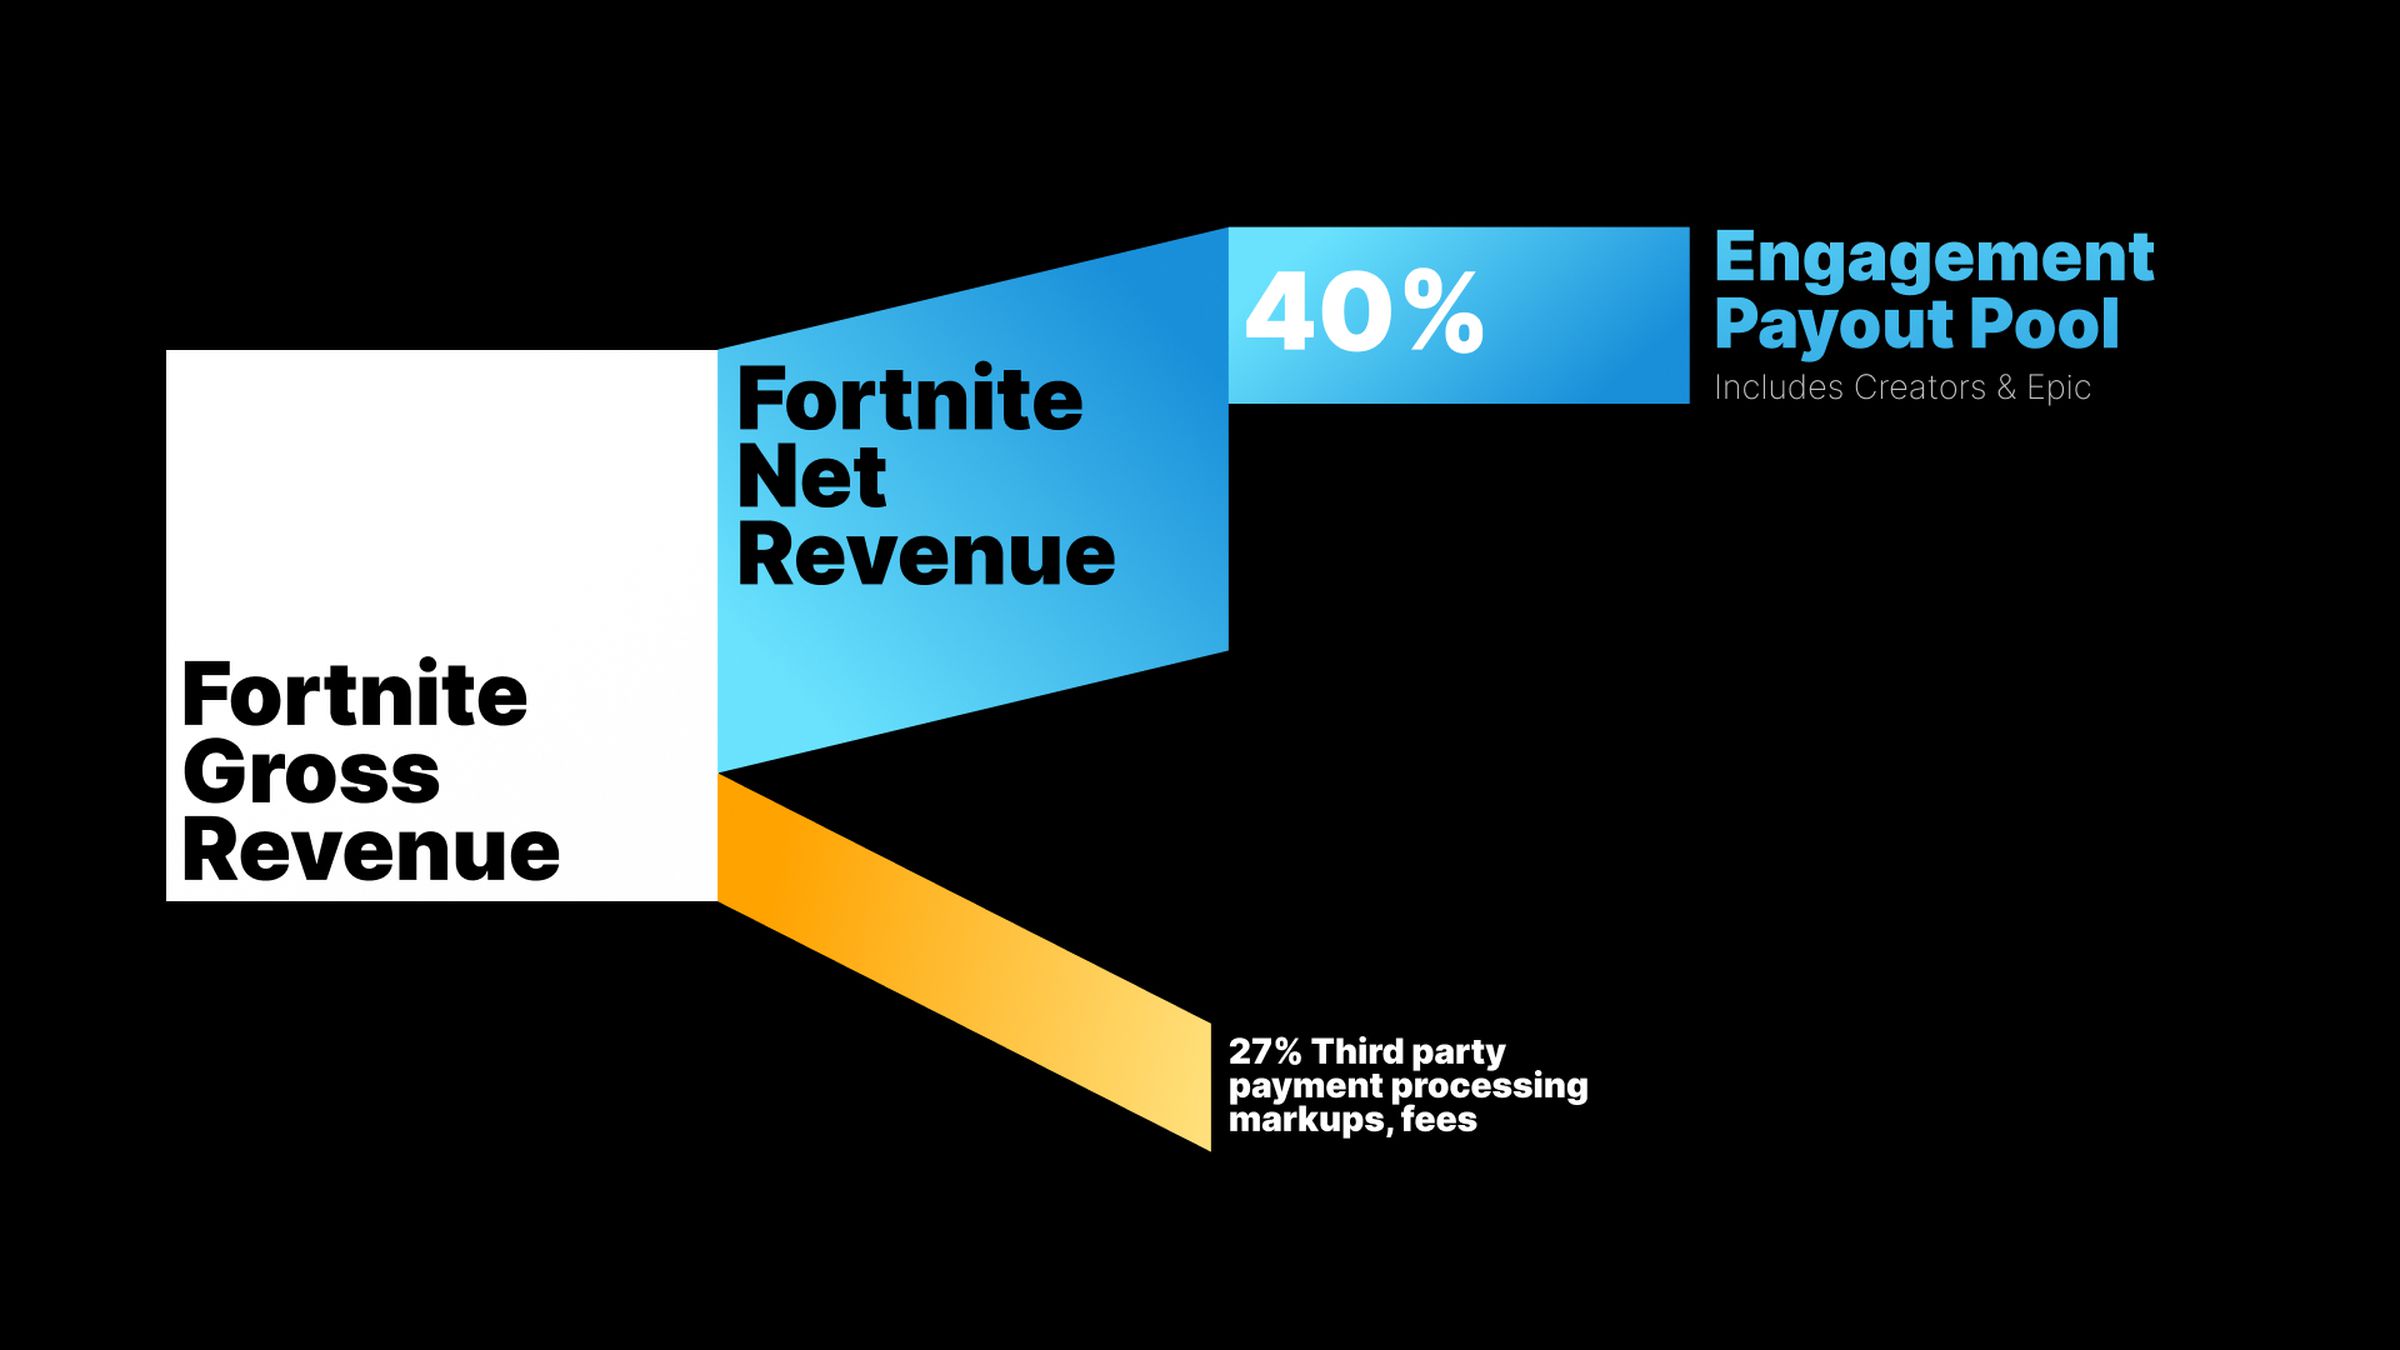 A chart showing how Epic distributes Fortnite’s revenues.